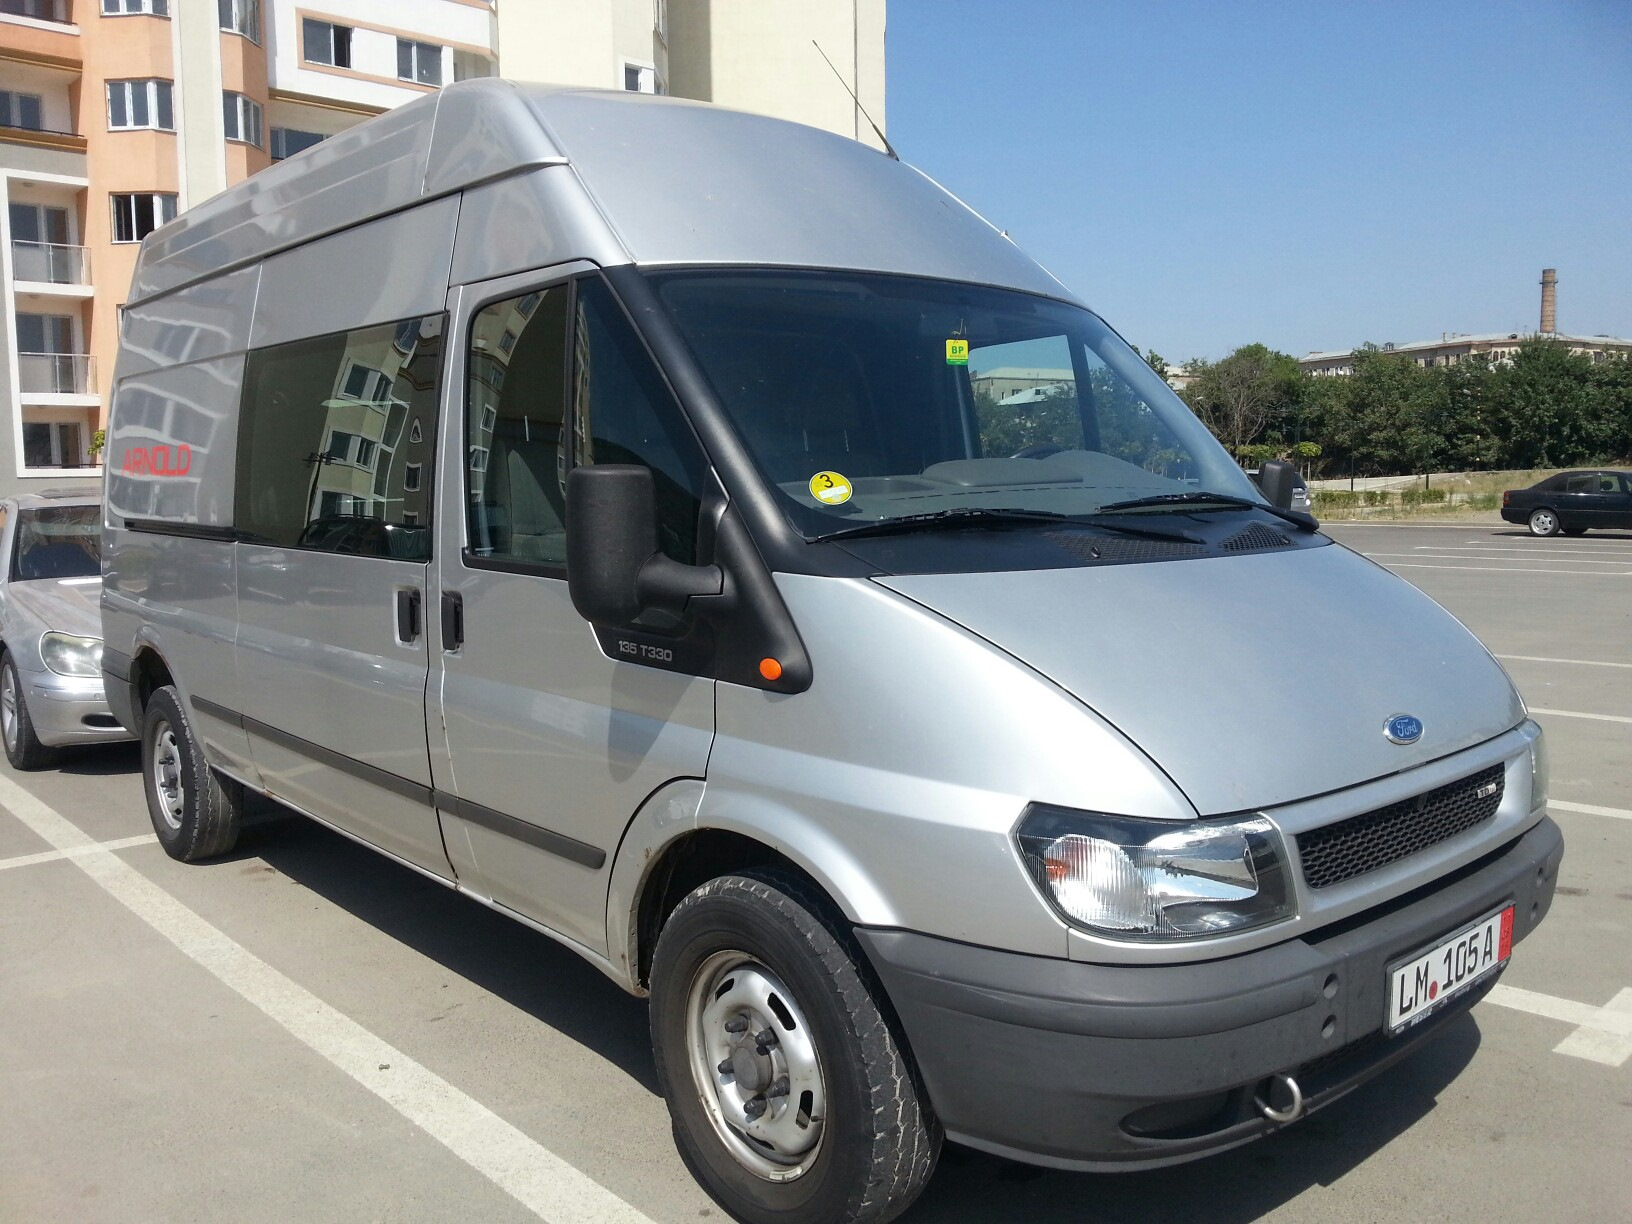 Форд транзит 20. Ford Transit 2. Ford Transit 2.2. Ford Transit 5. Форд Транзит 2005 2.4 дизель.